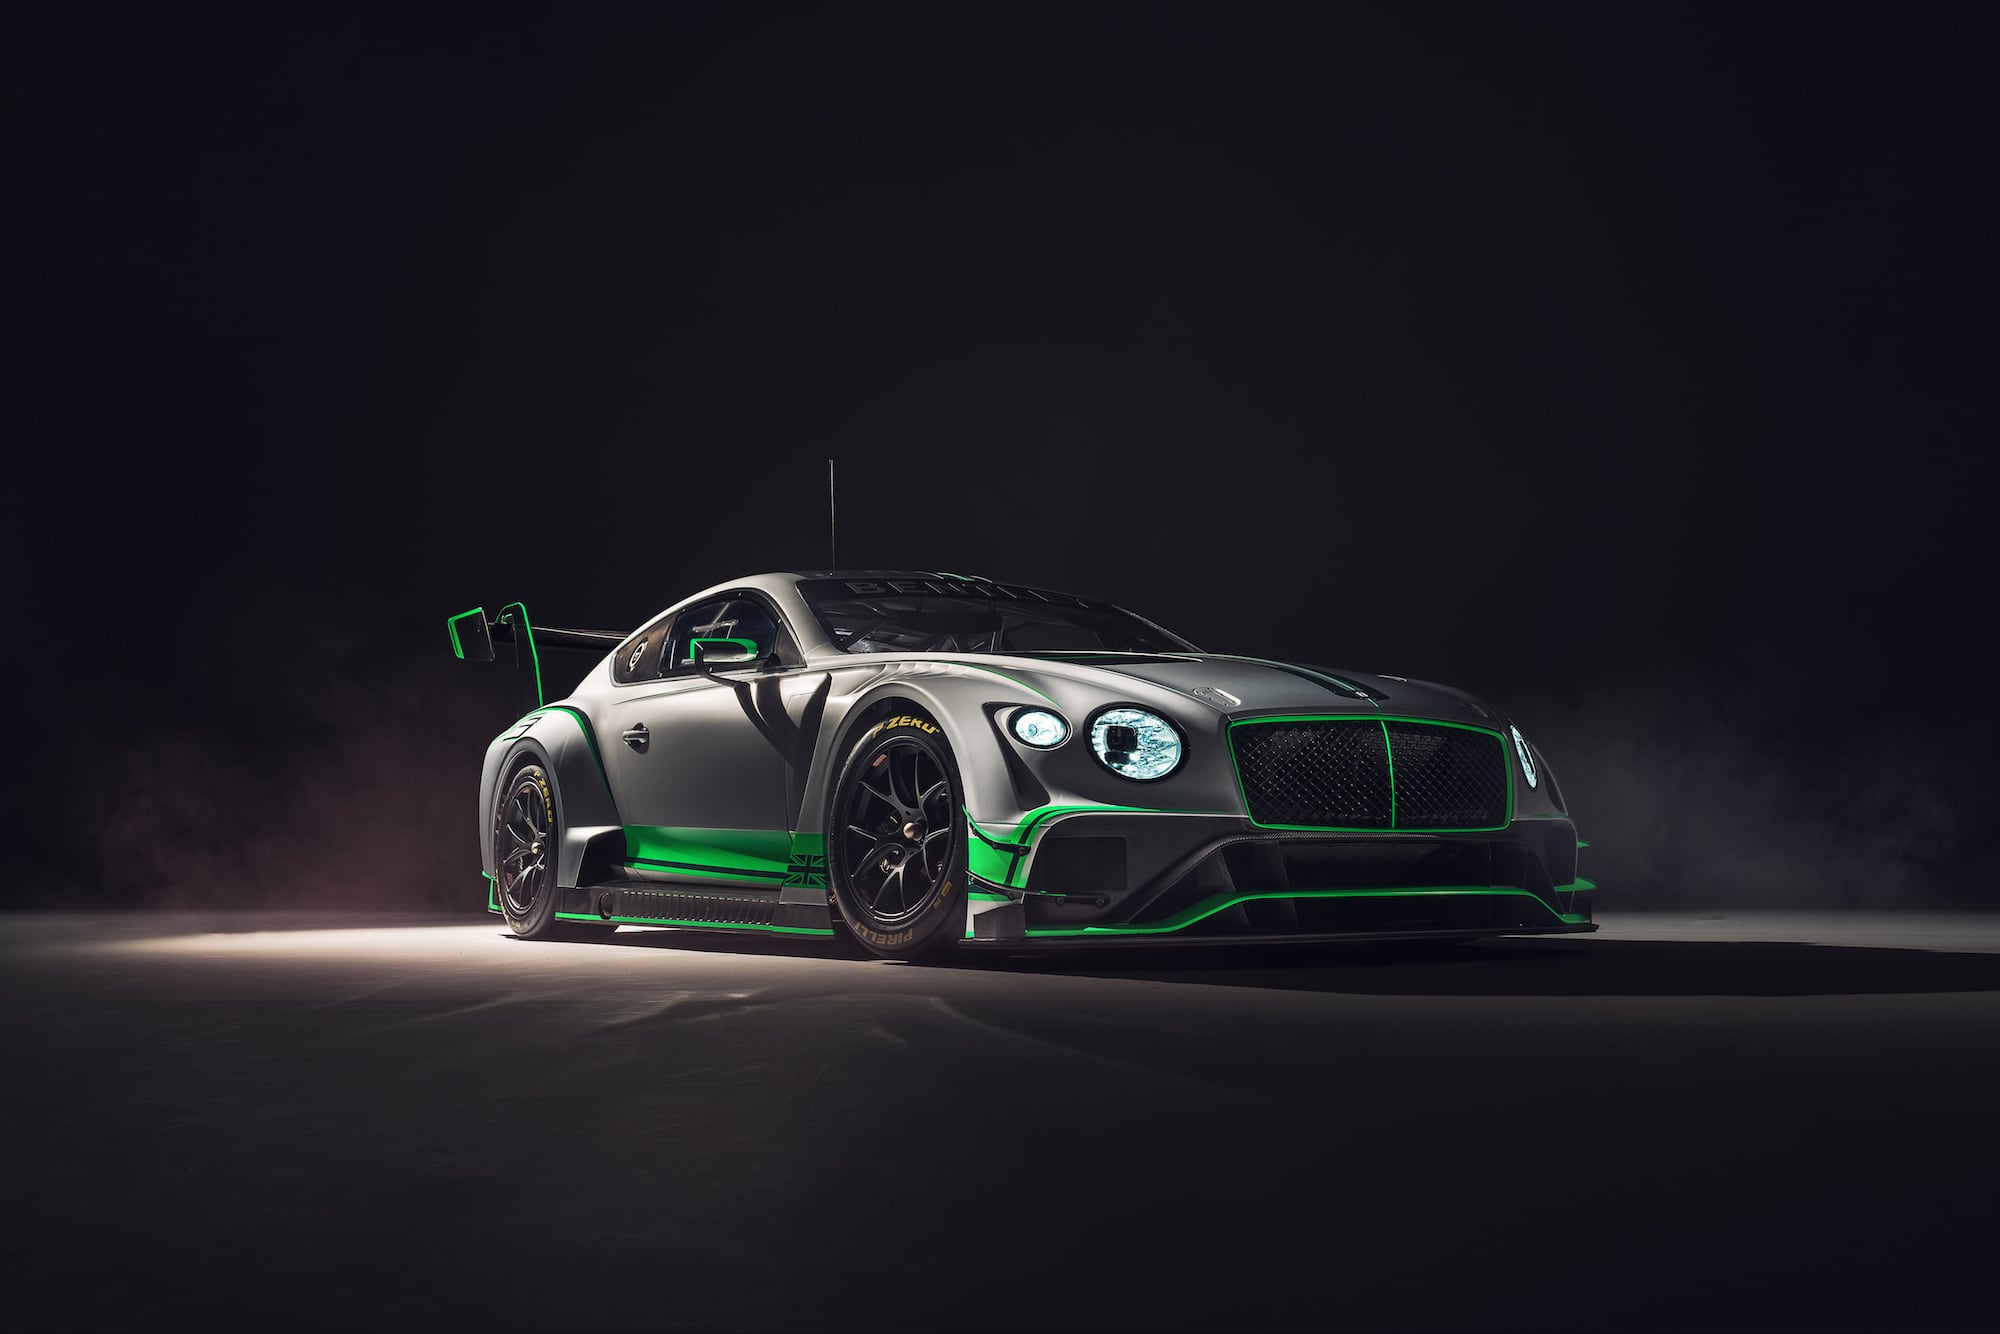 Continental GT3 featured